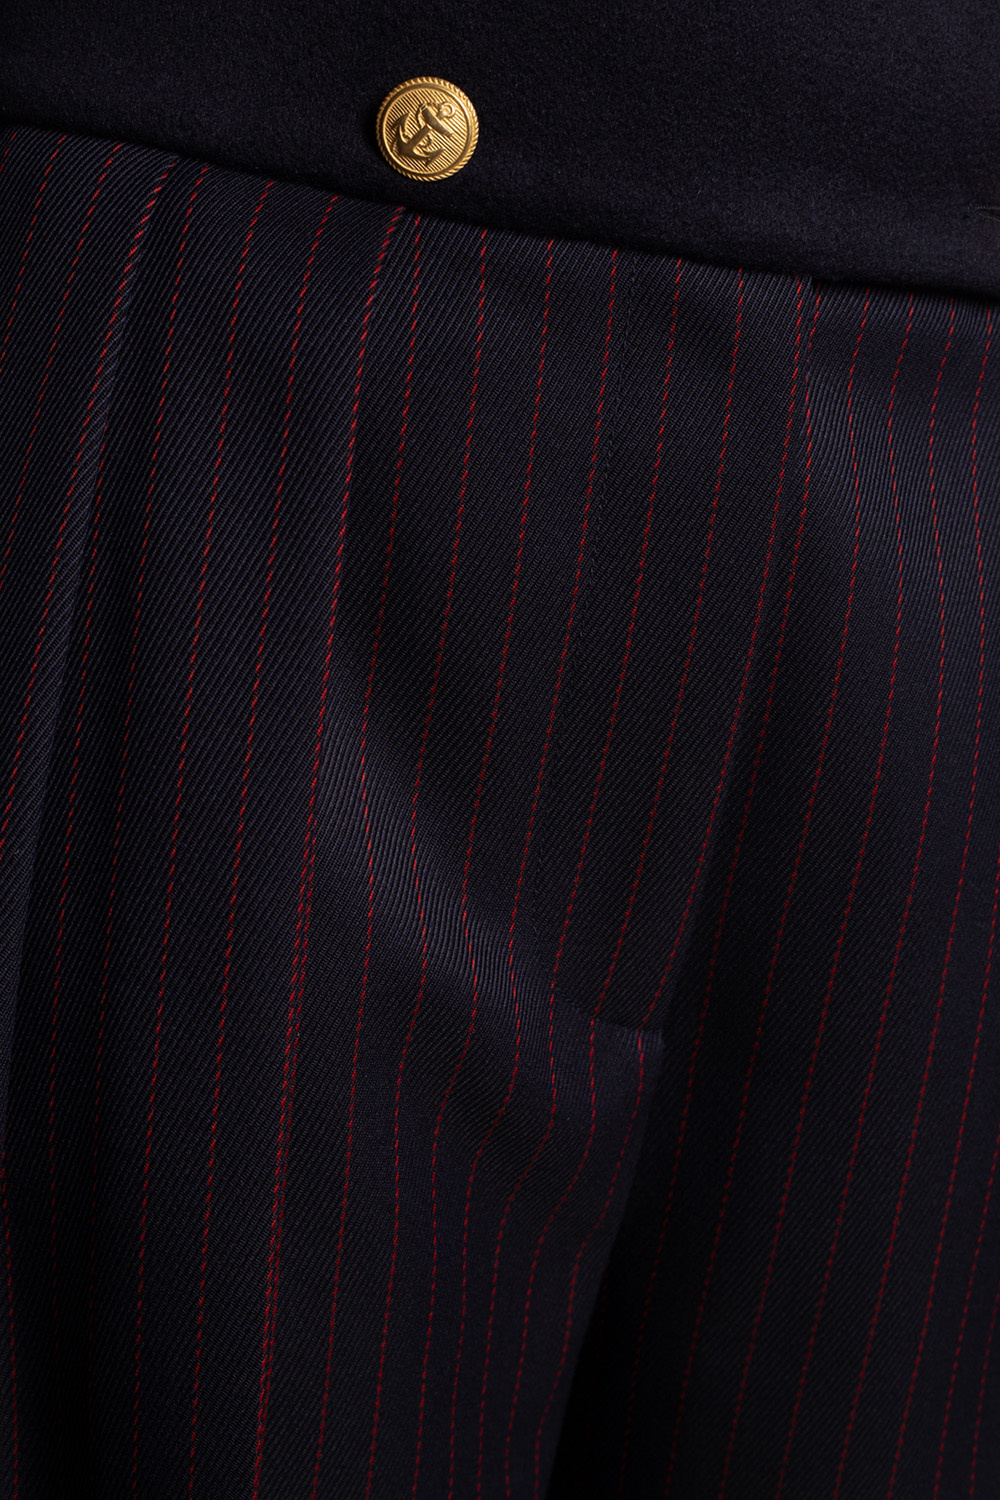 Victoria Beckham Pinstriped trousers